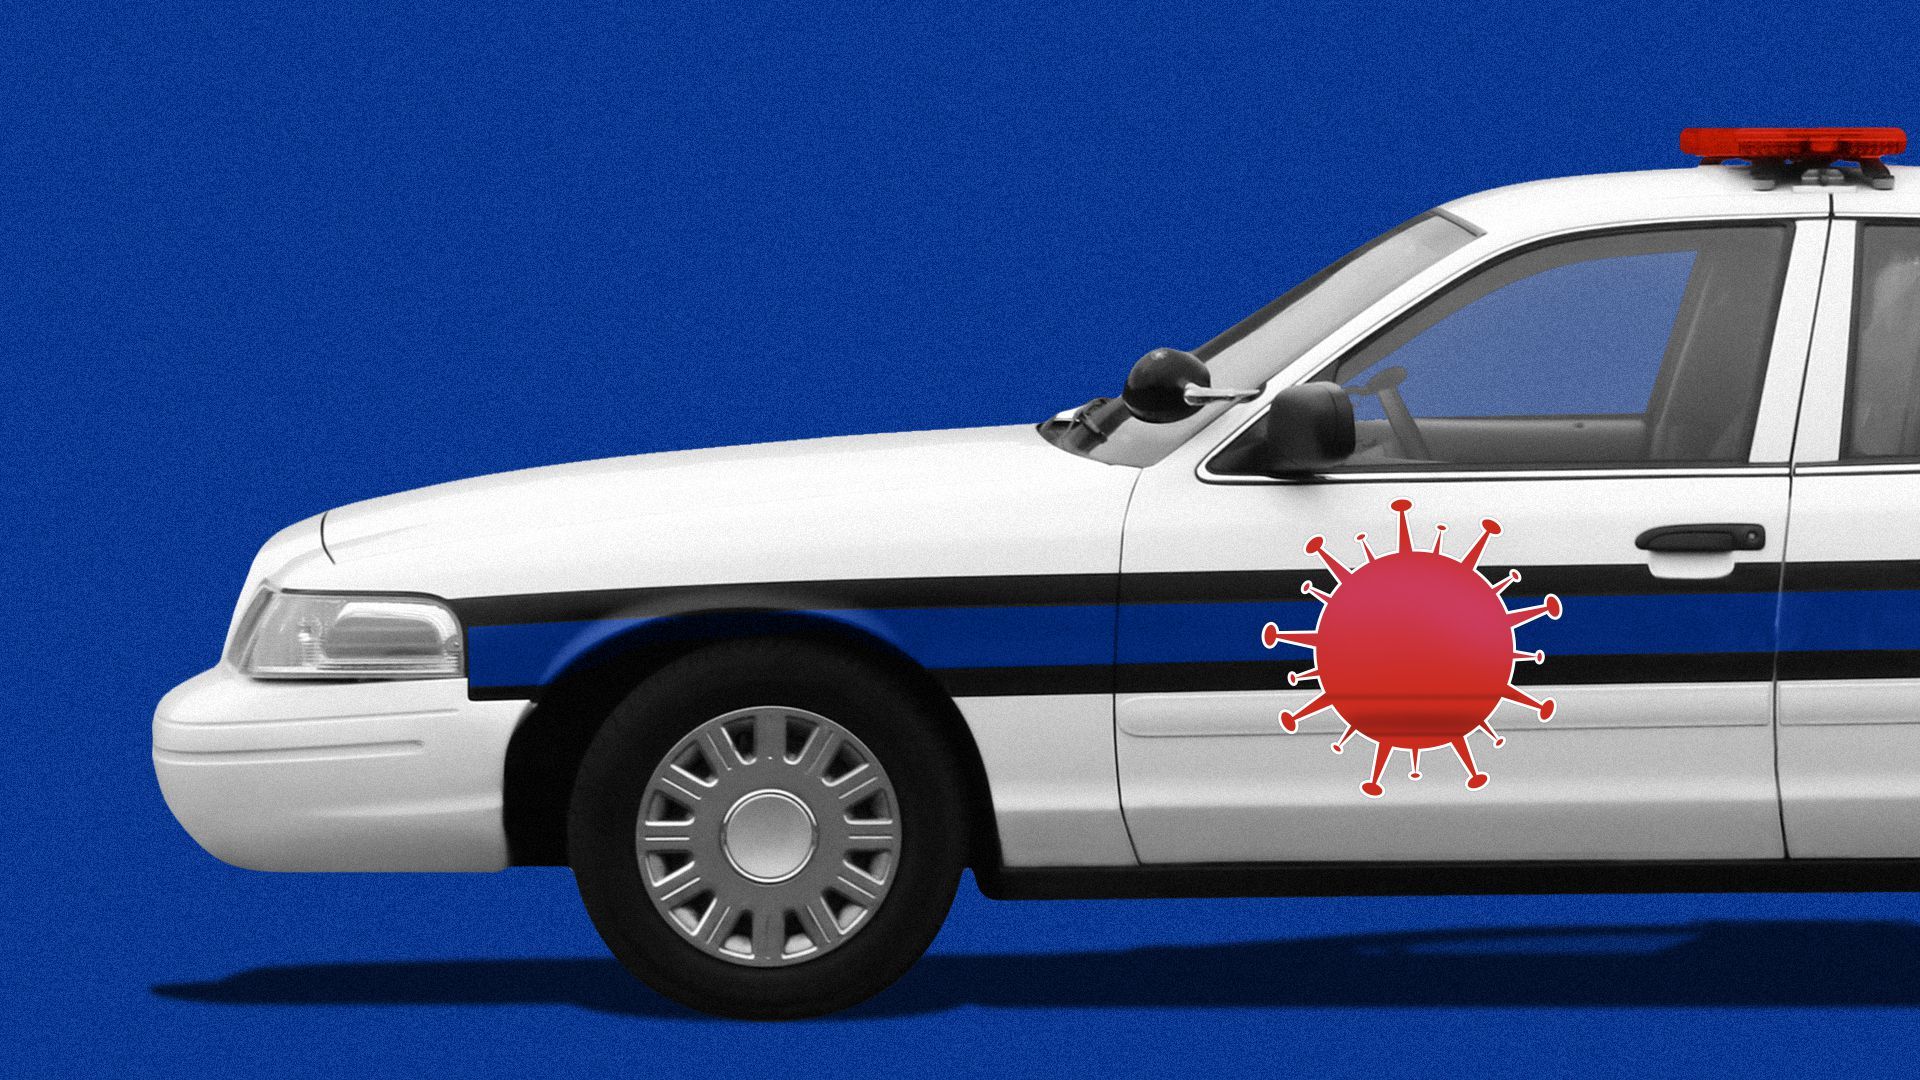 Illustration of a COVID-19 particle decal on the side of a police car.